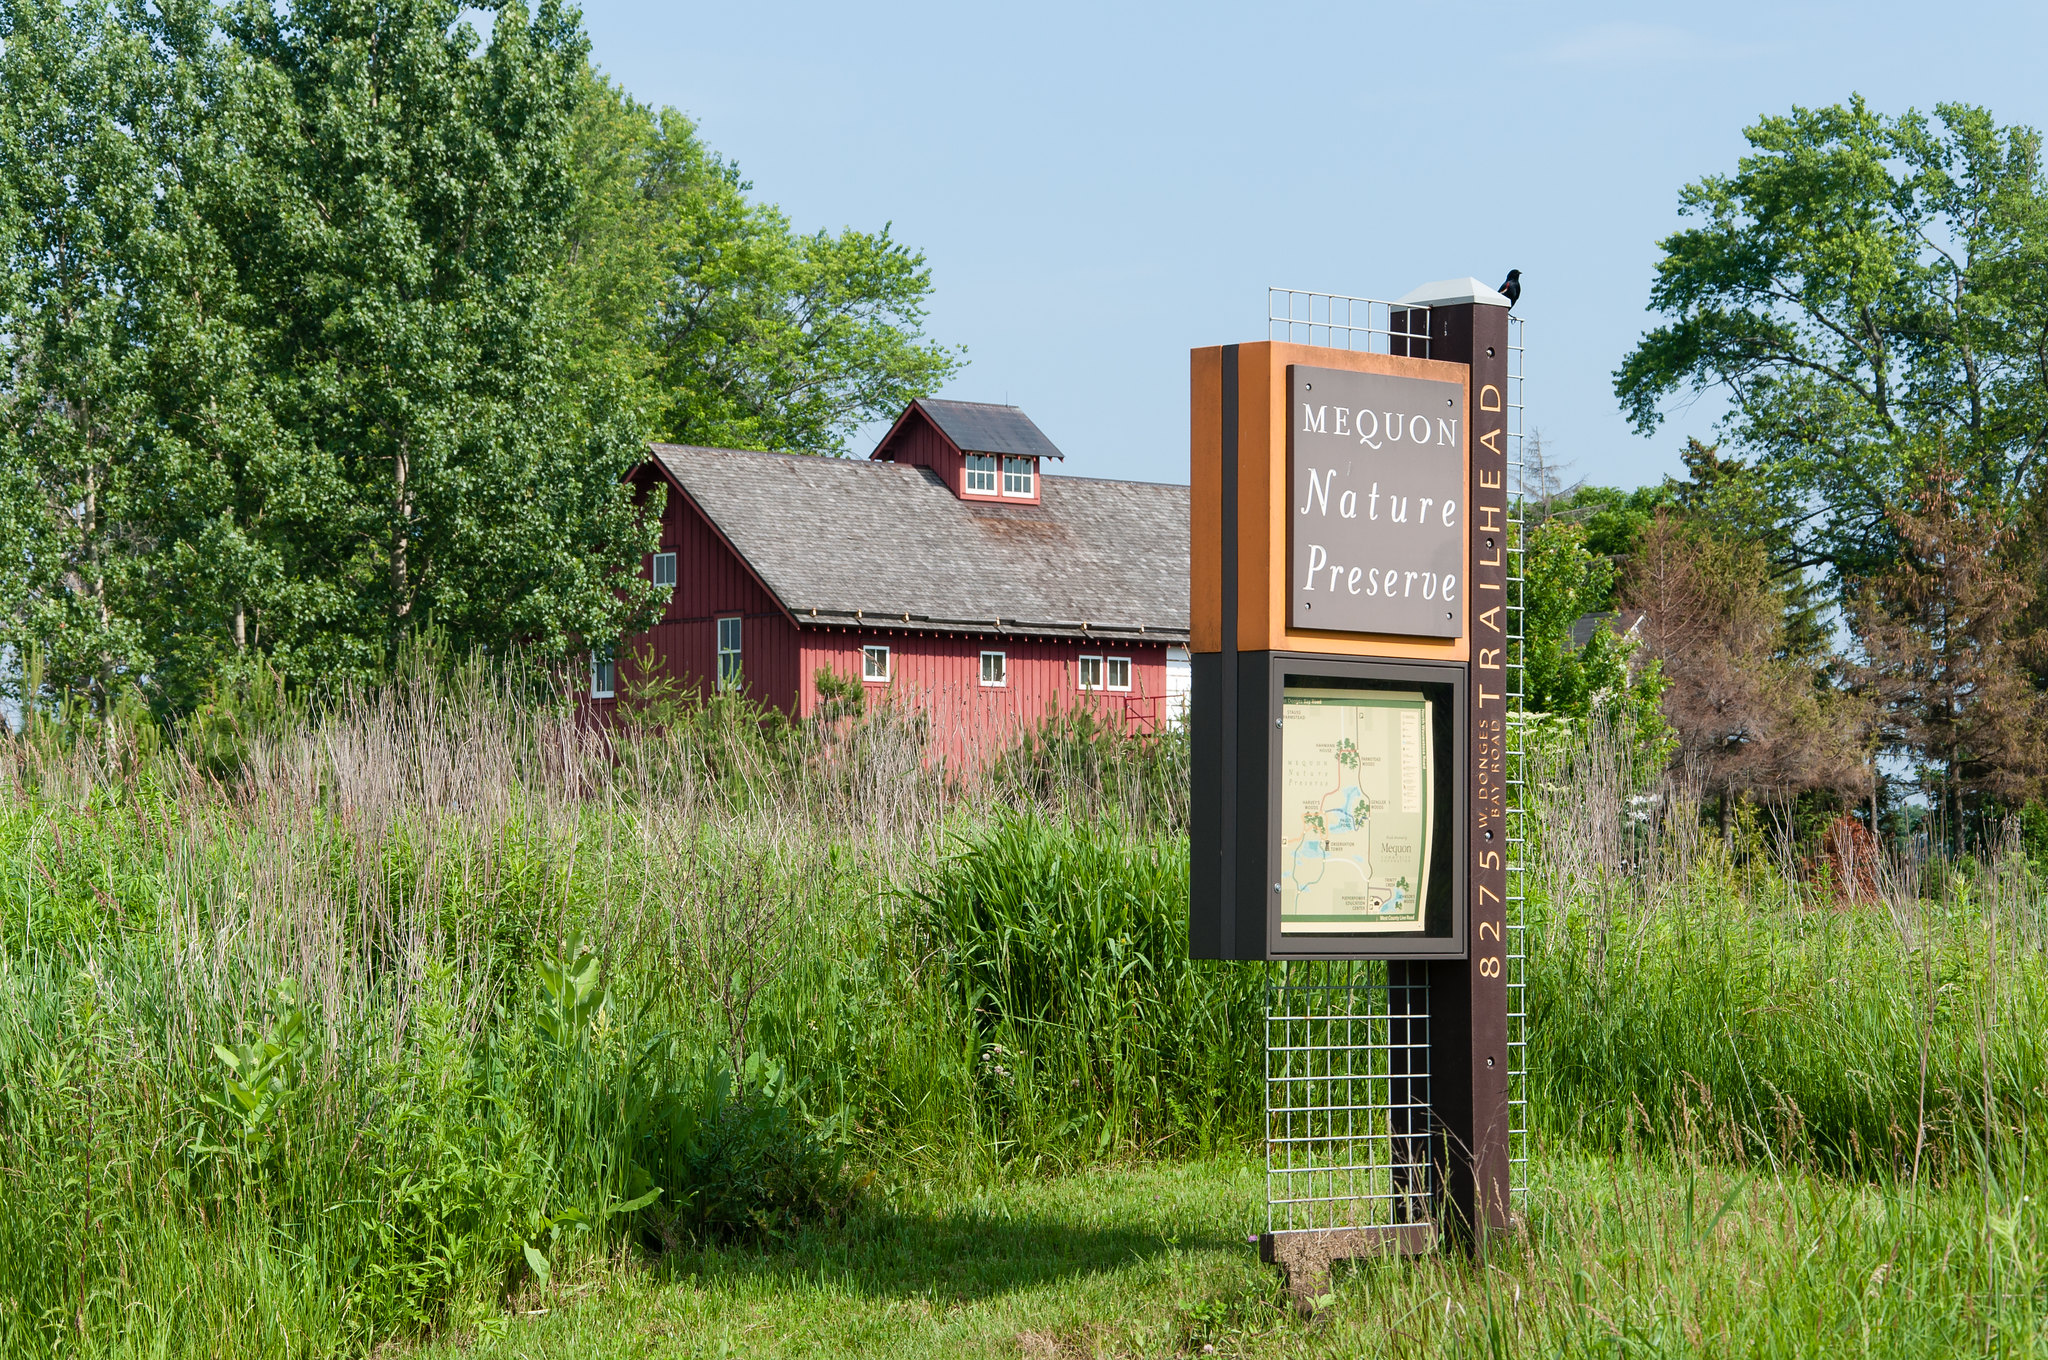 The Mequon Nature Preserve trailhead in front wildflowers and a barn